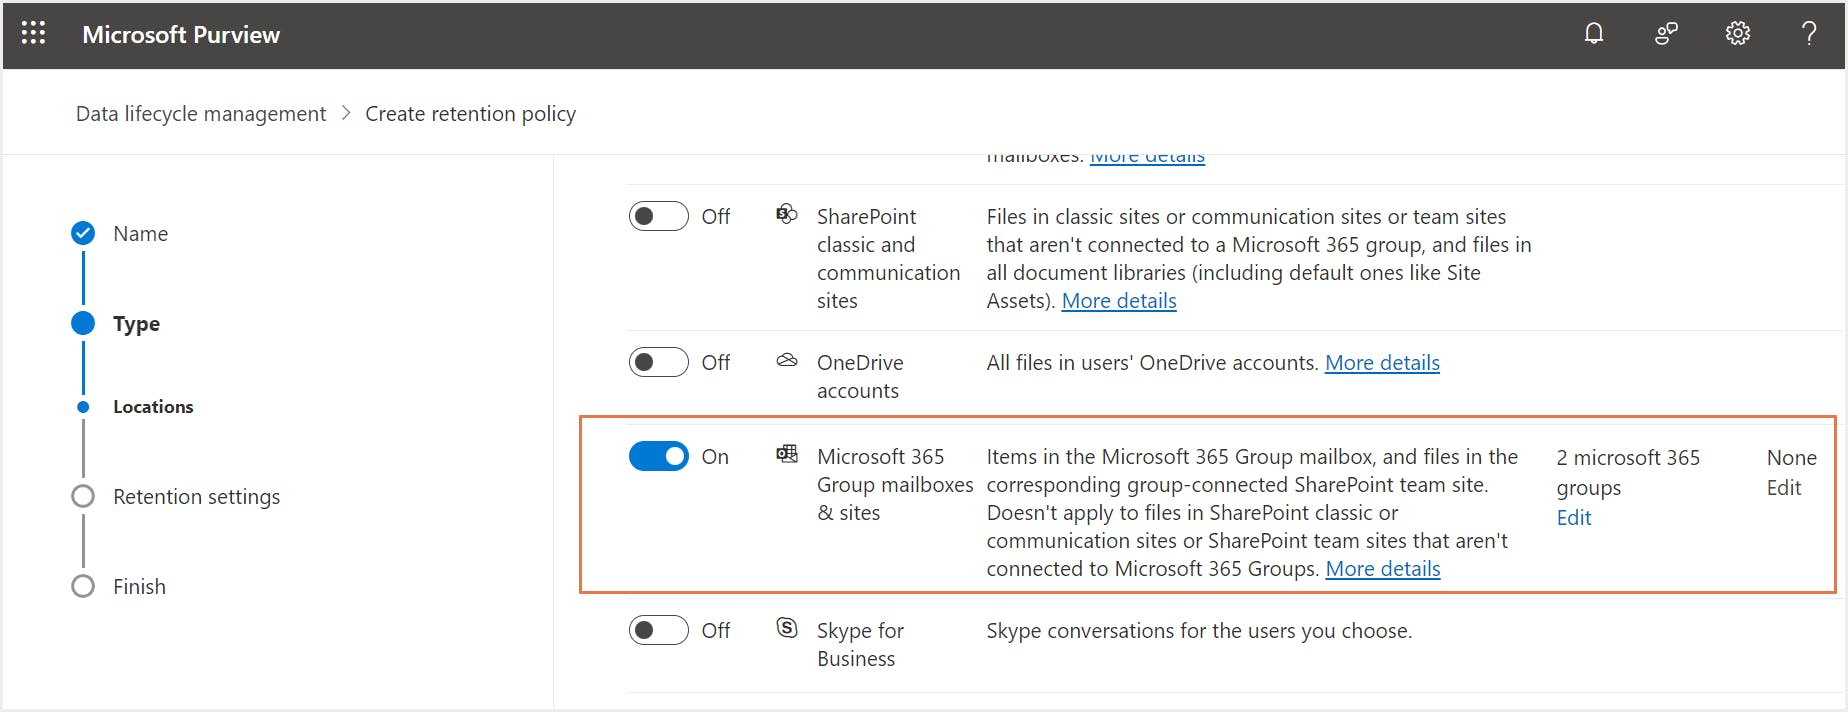 choose microsoft 365 group mailboxes and sites